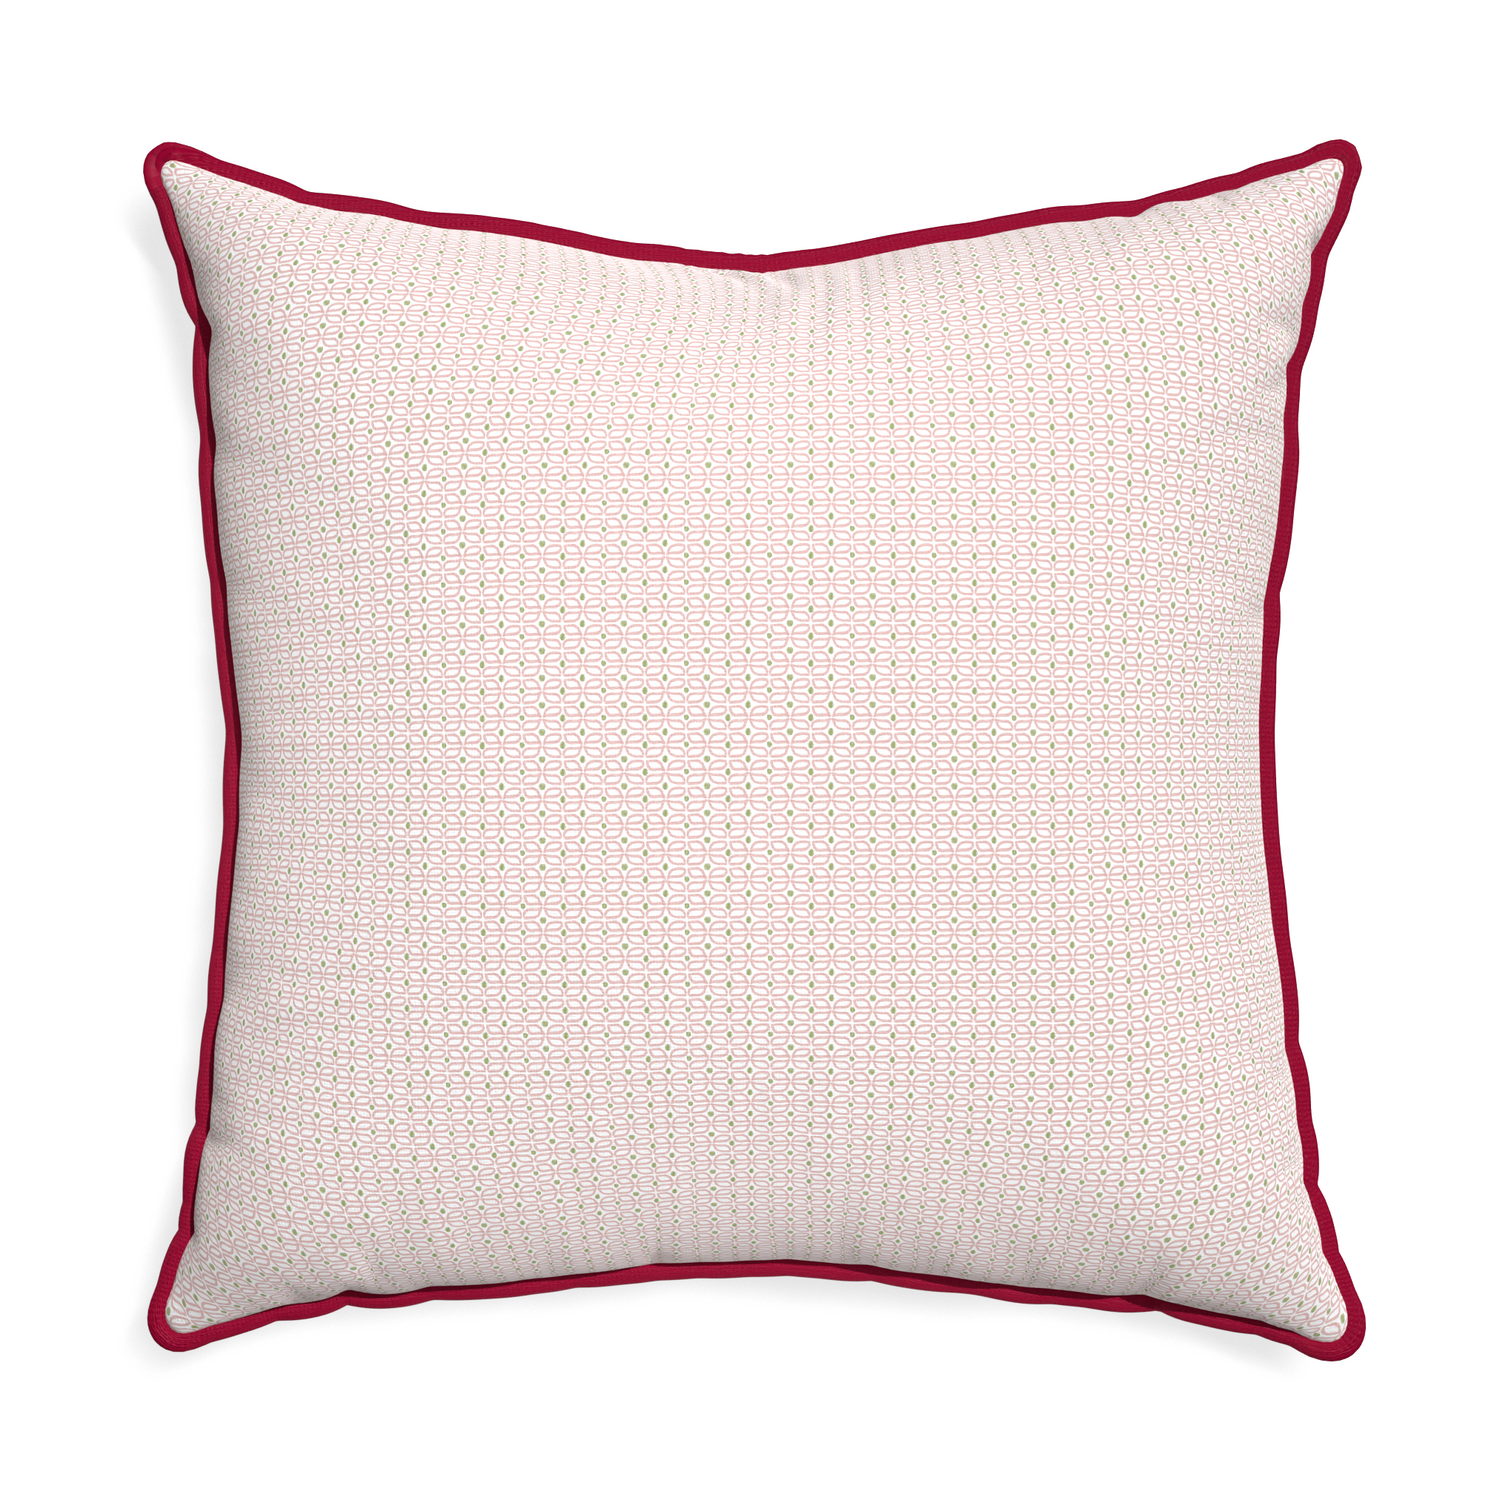 Euro-sham loomi pink custom pink geometricpillow with raspberry piping on white background